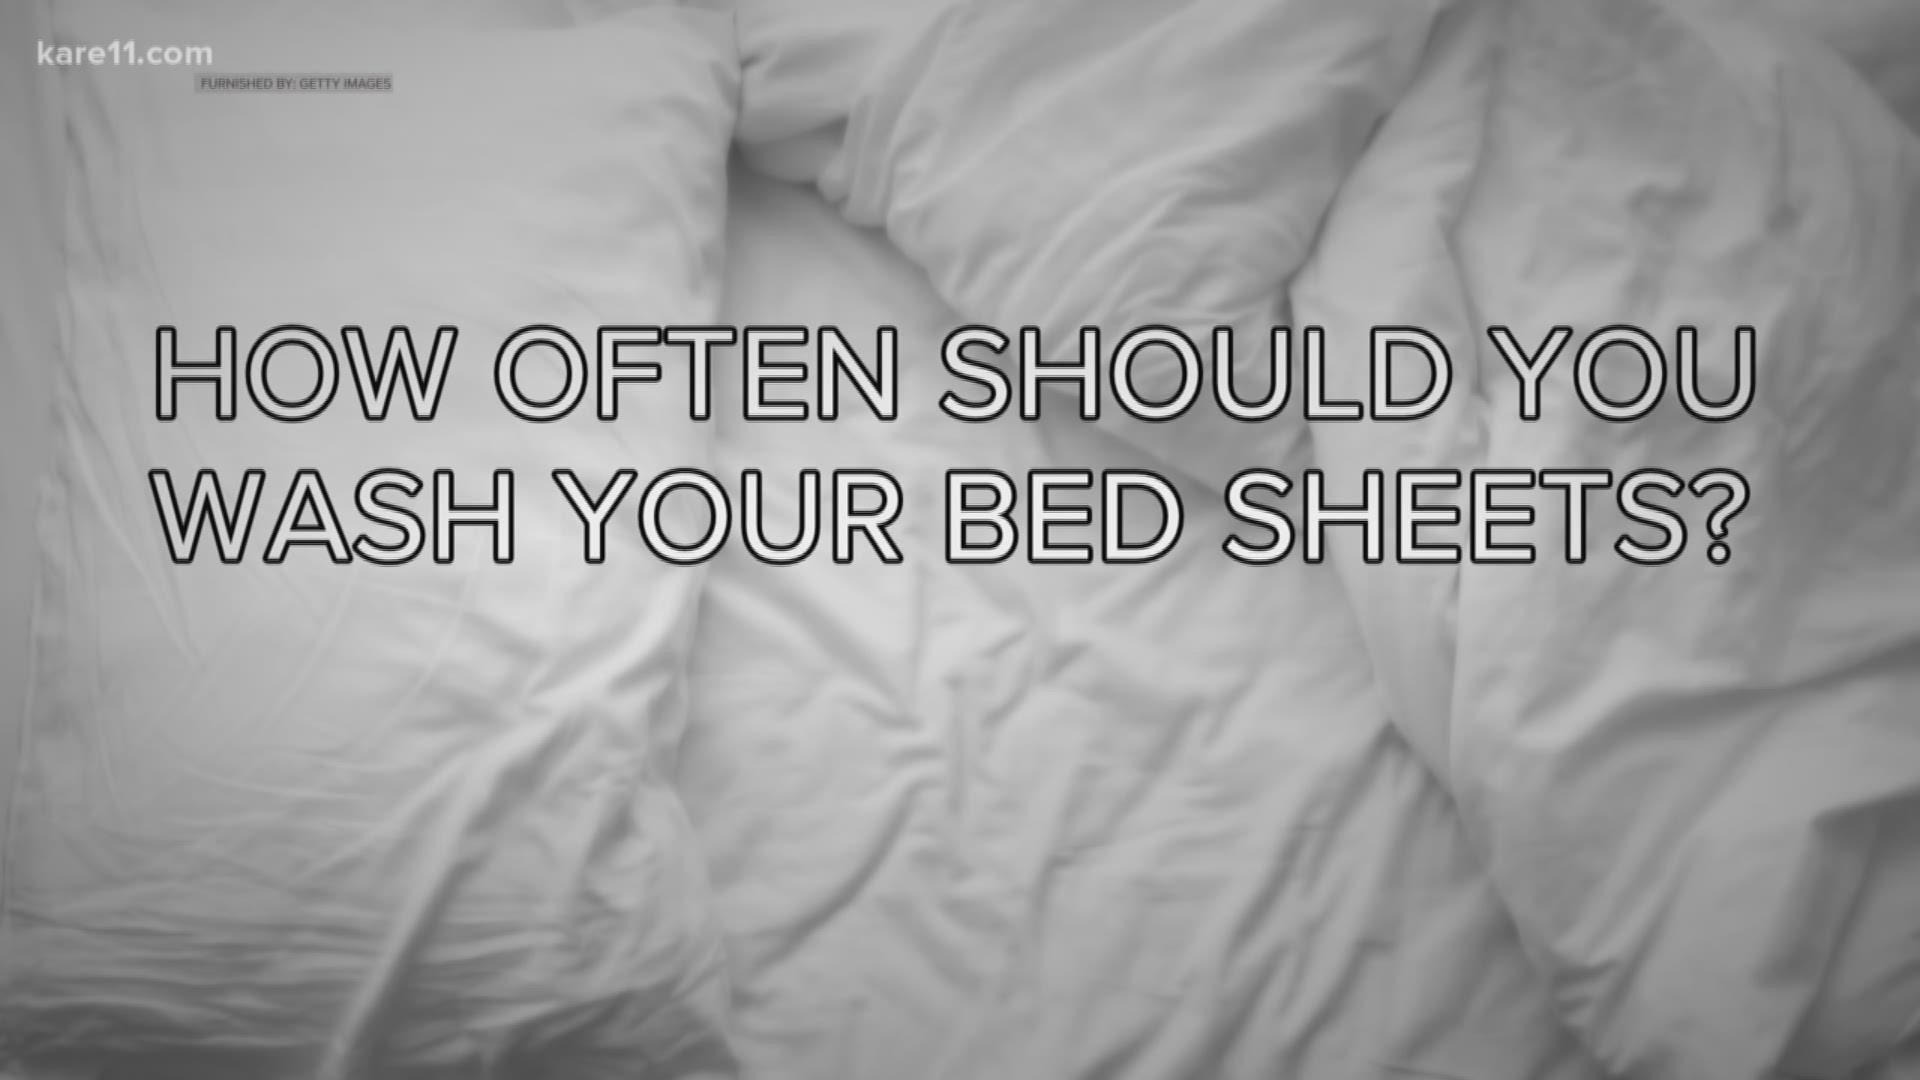 How Often Should You Wash Sheets?